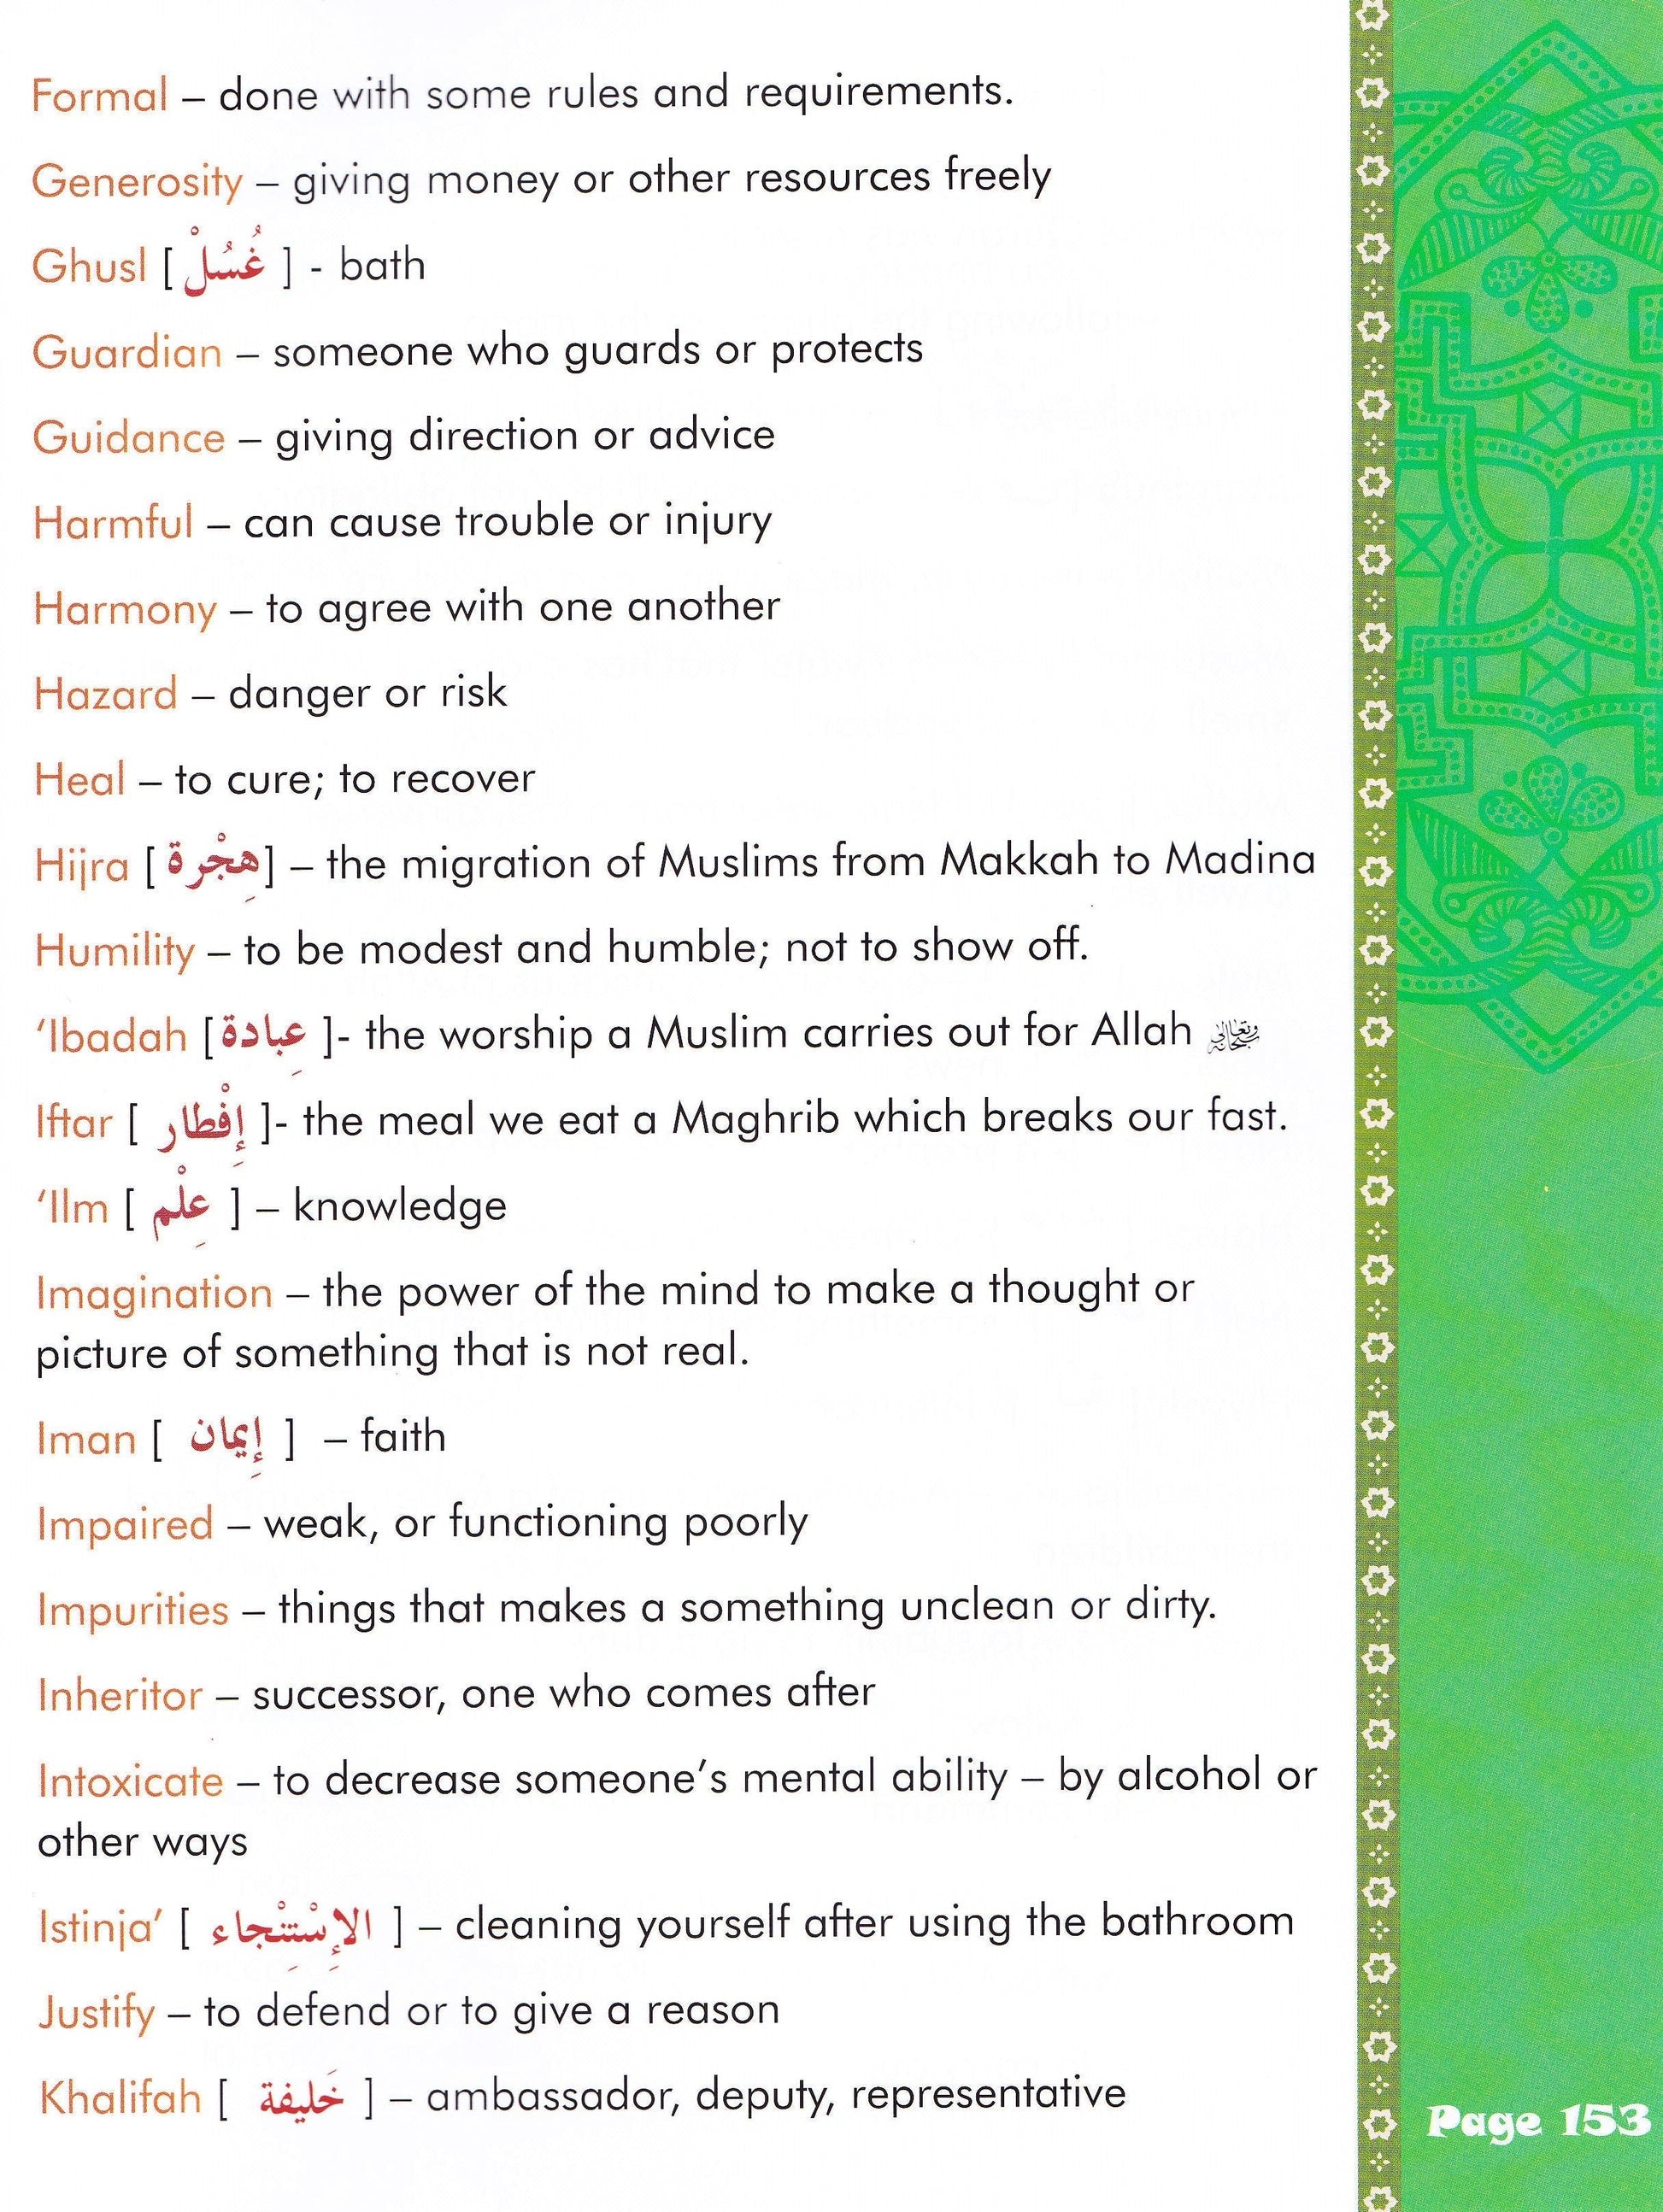 We Are Muslims: Elementary Grade 4 Textbook - Premium Textbook from IQRA' international Educational Foundation - Just $15! Shop now at IQRA' international Educational Foundation